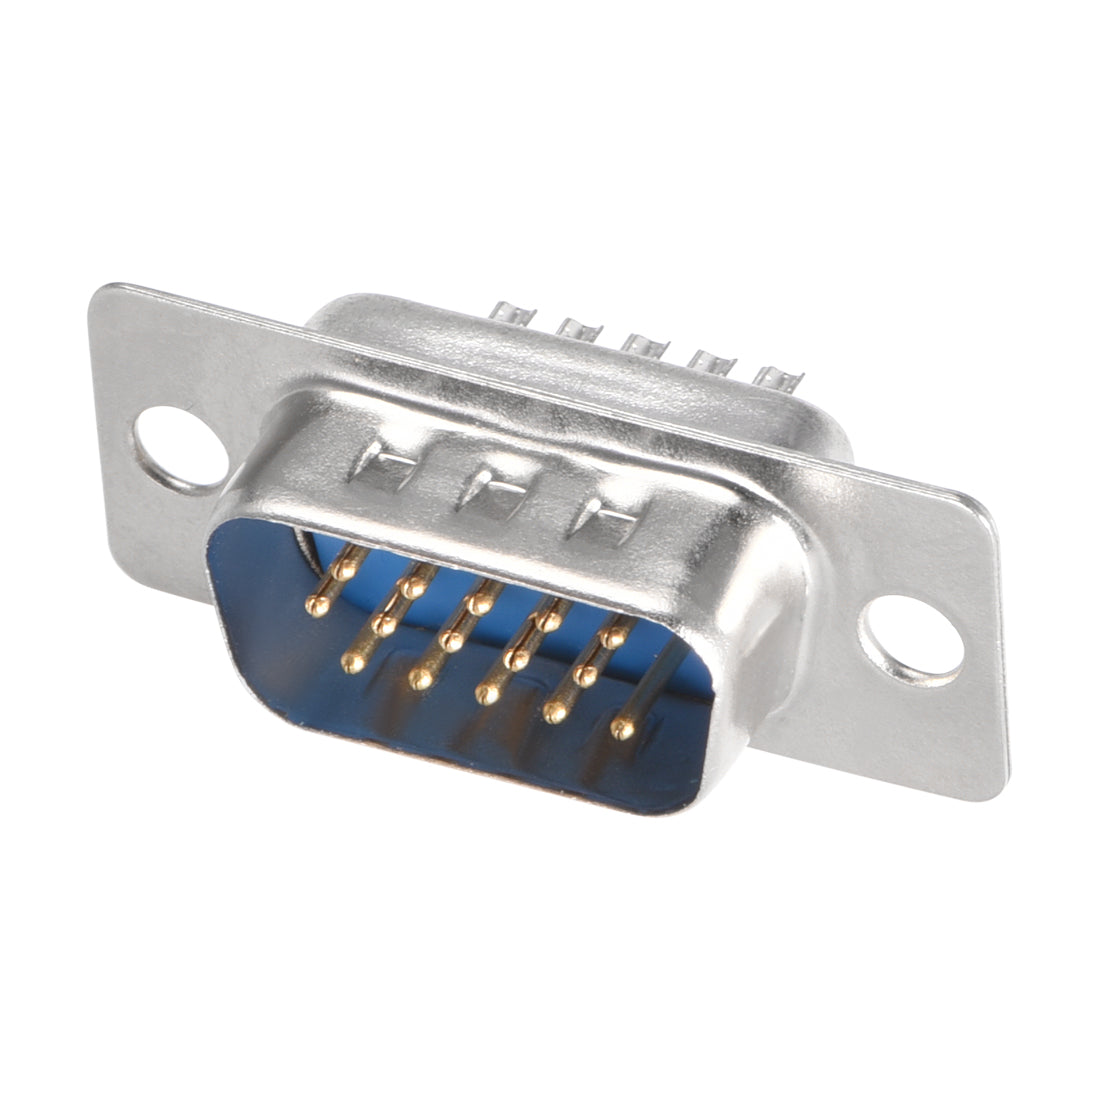 uxcell Uxcell D-sub Connector Male Plug 15-pin 3-row Port Terminal Breakout for Mechanical Equipment CNC Computers Blue 10pcs